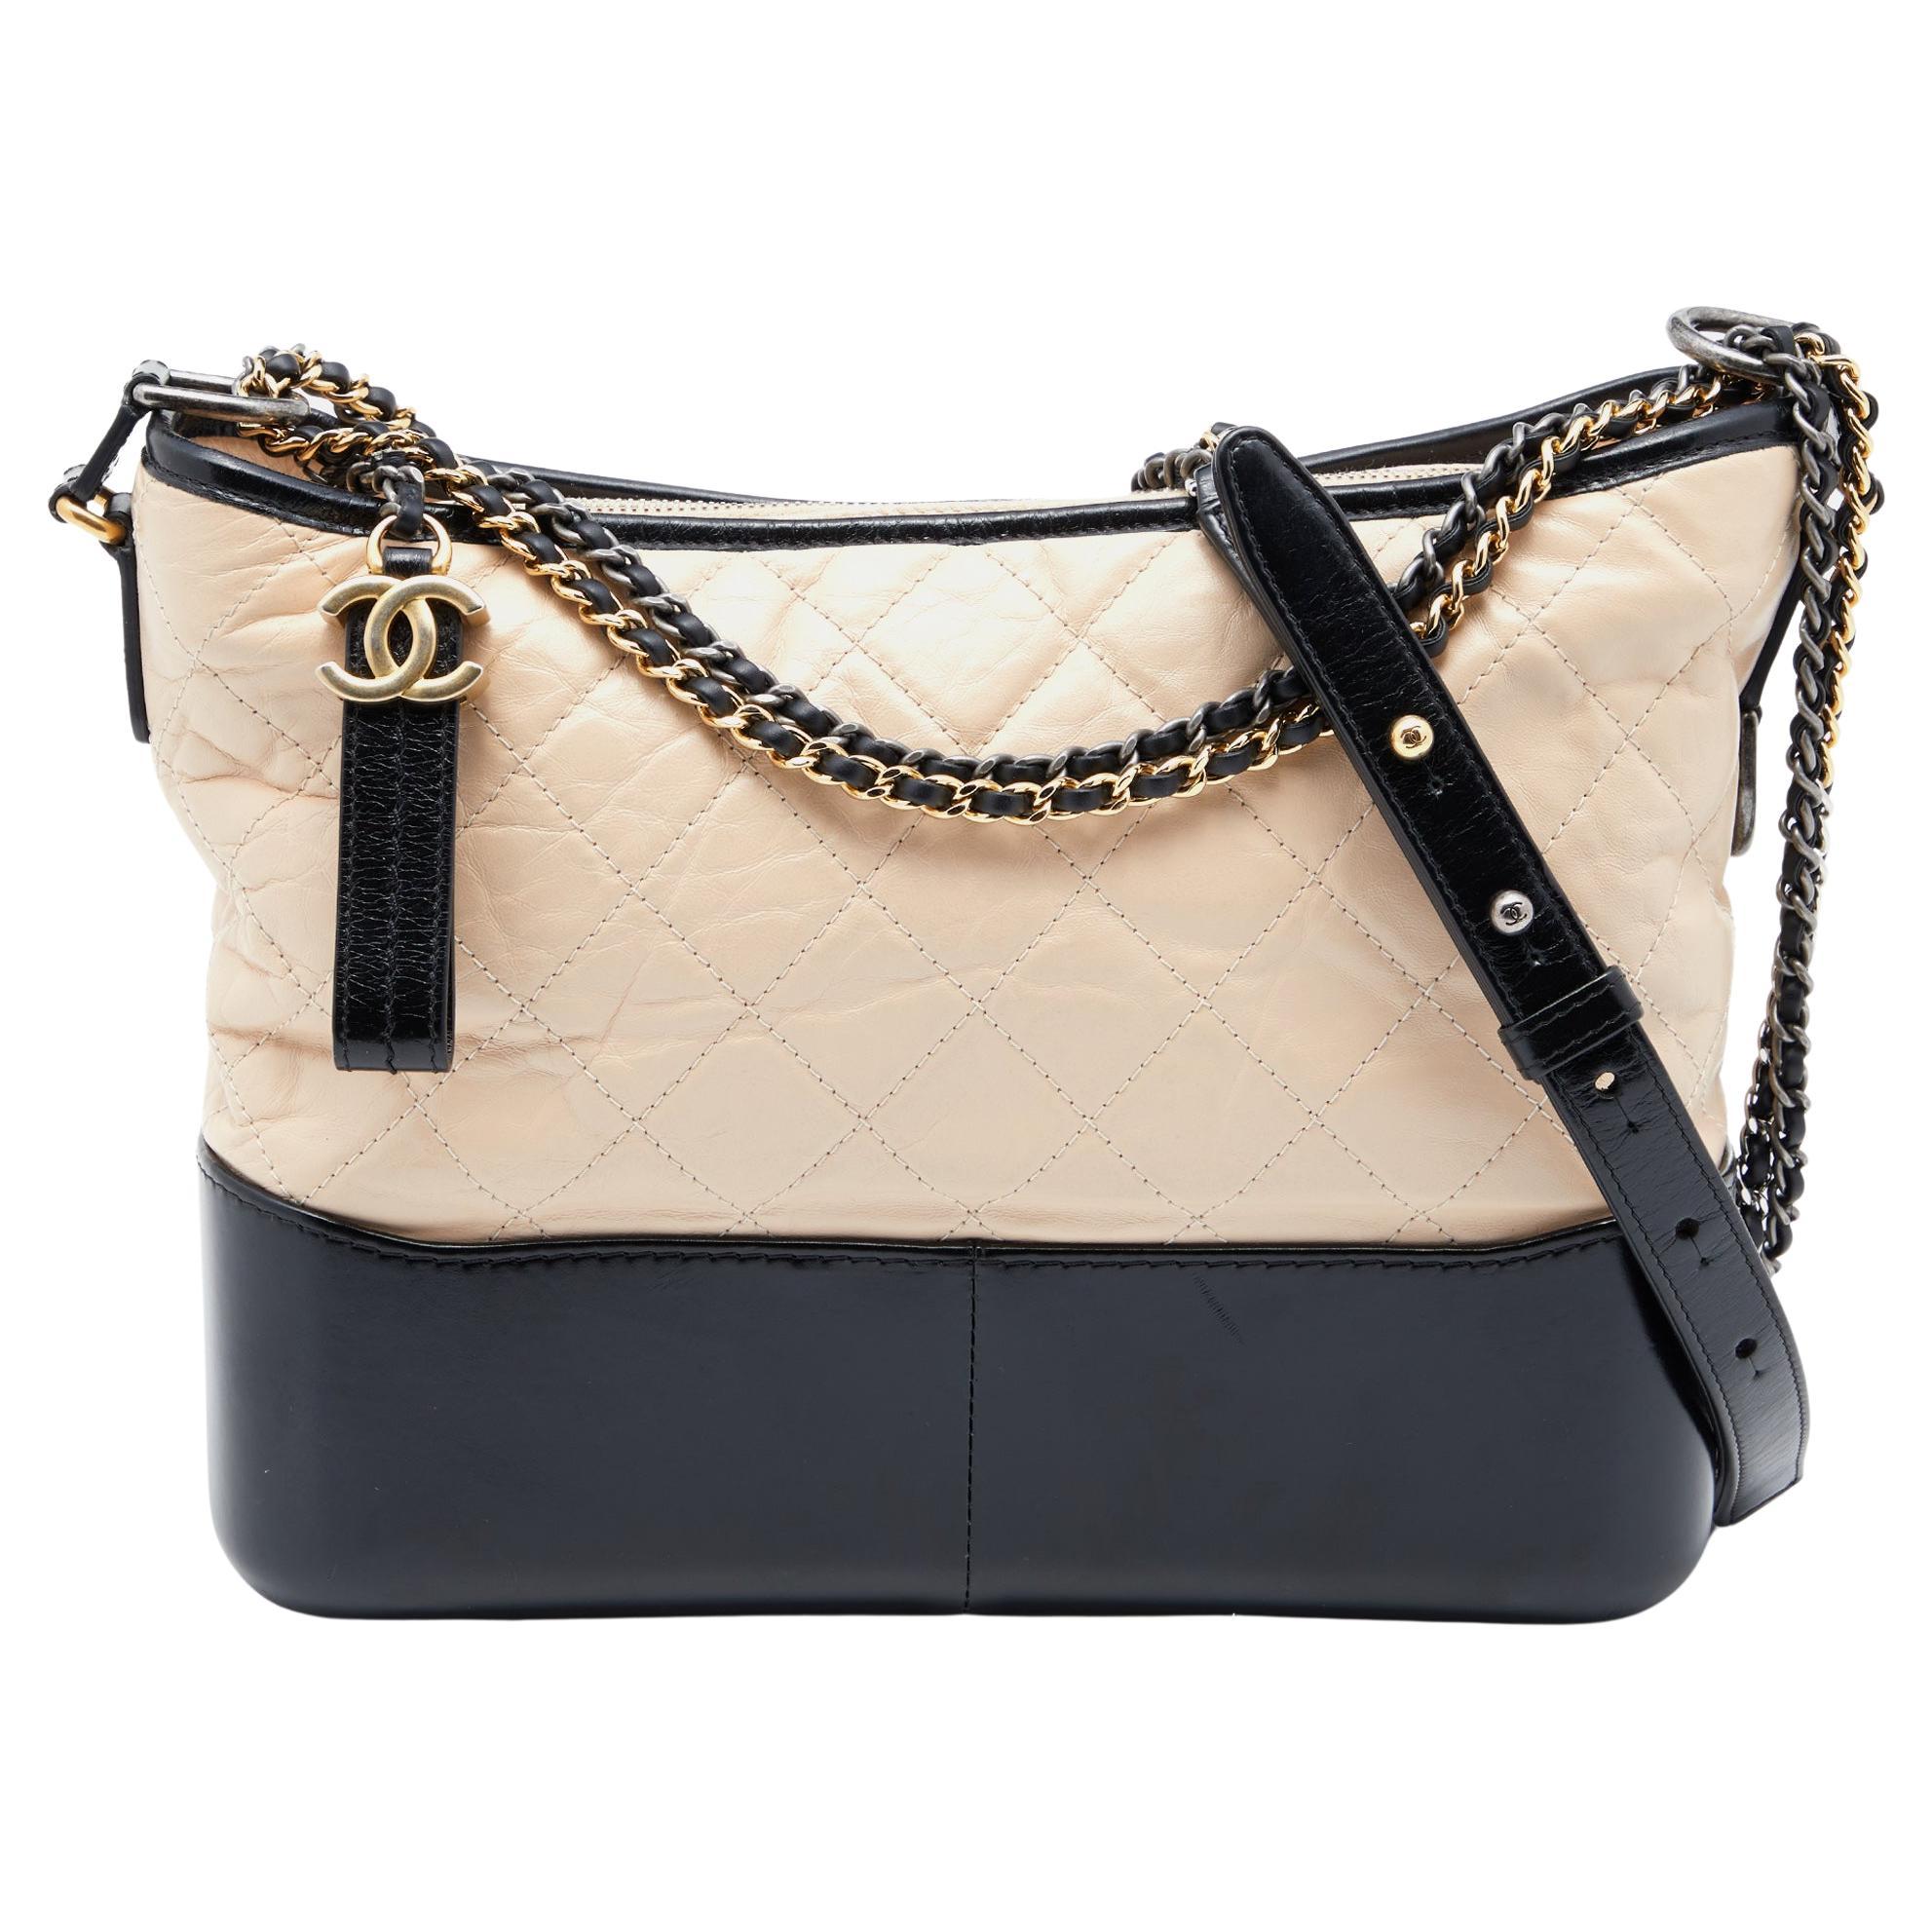 Chanel Beige/Black Quilted Aged Leather Medium Gabrielle Bag at